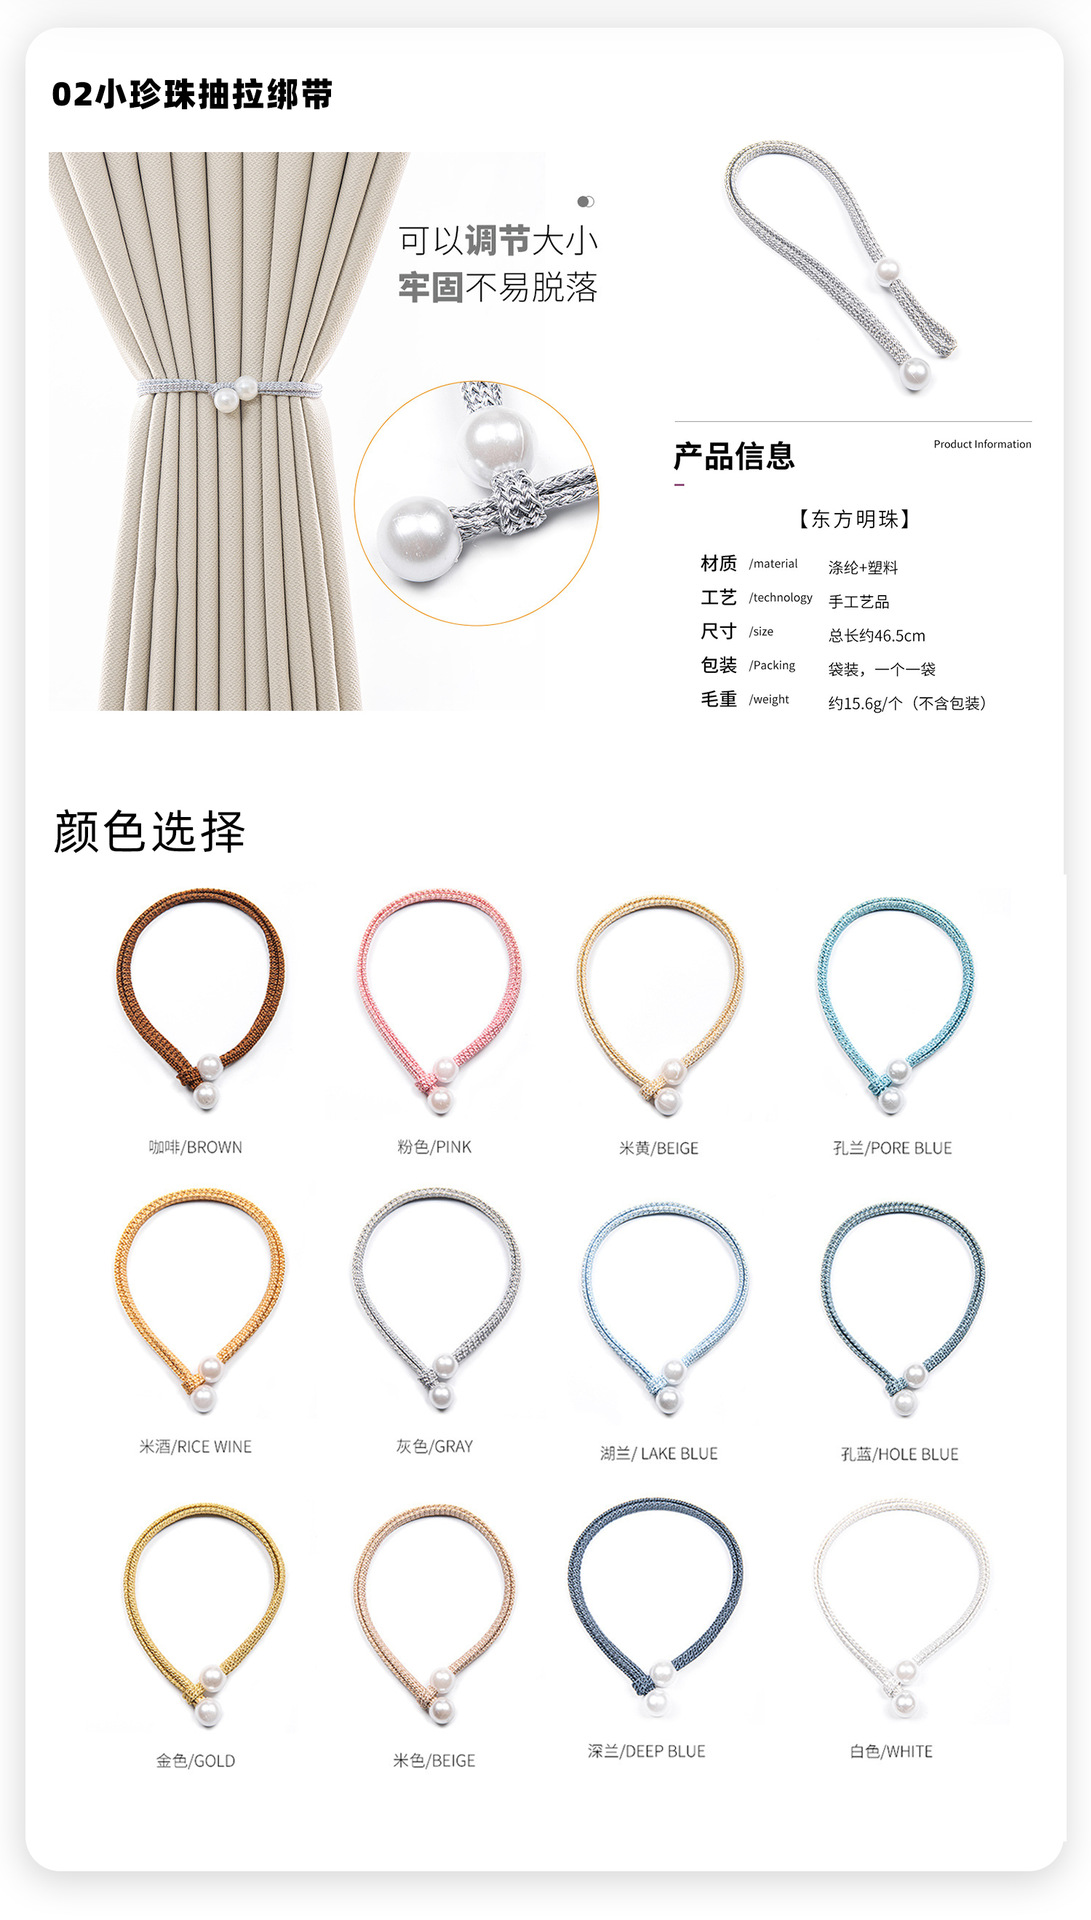 Magnetic Snap Curtain Bandage Punch-Free Installation-Free Fashion Curtain Magnetic Buckle Curtain Accessories